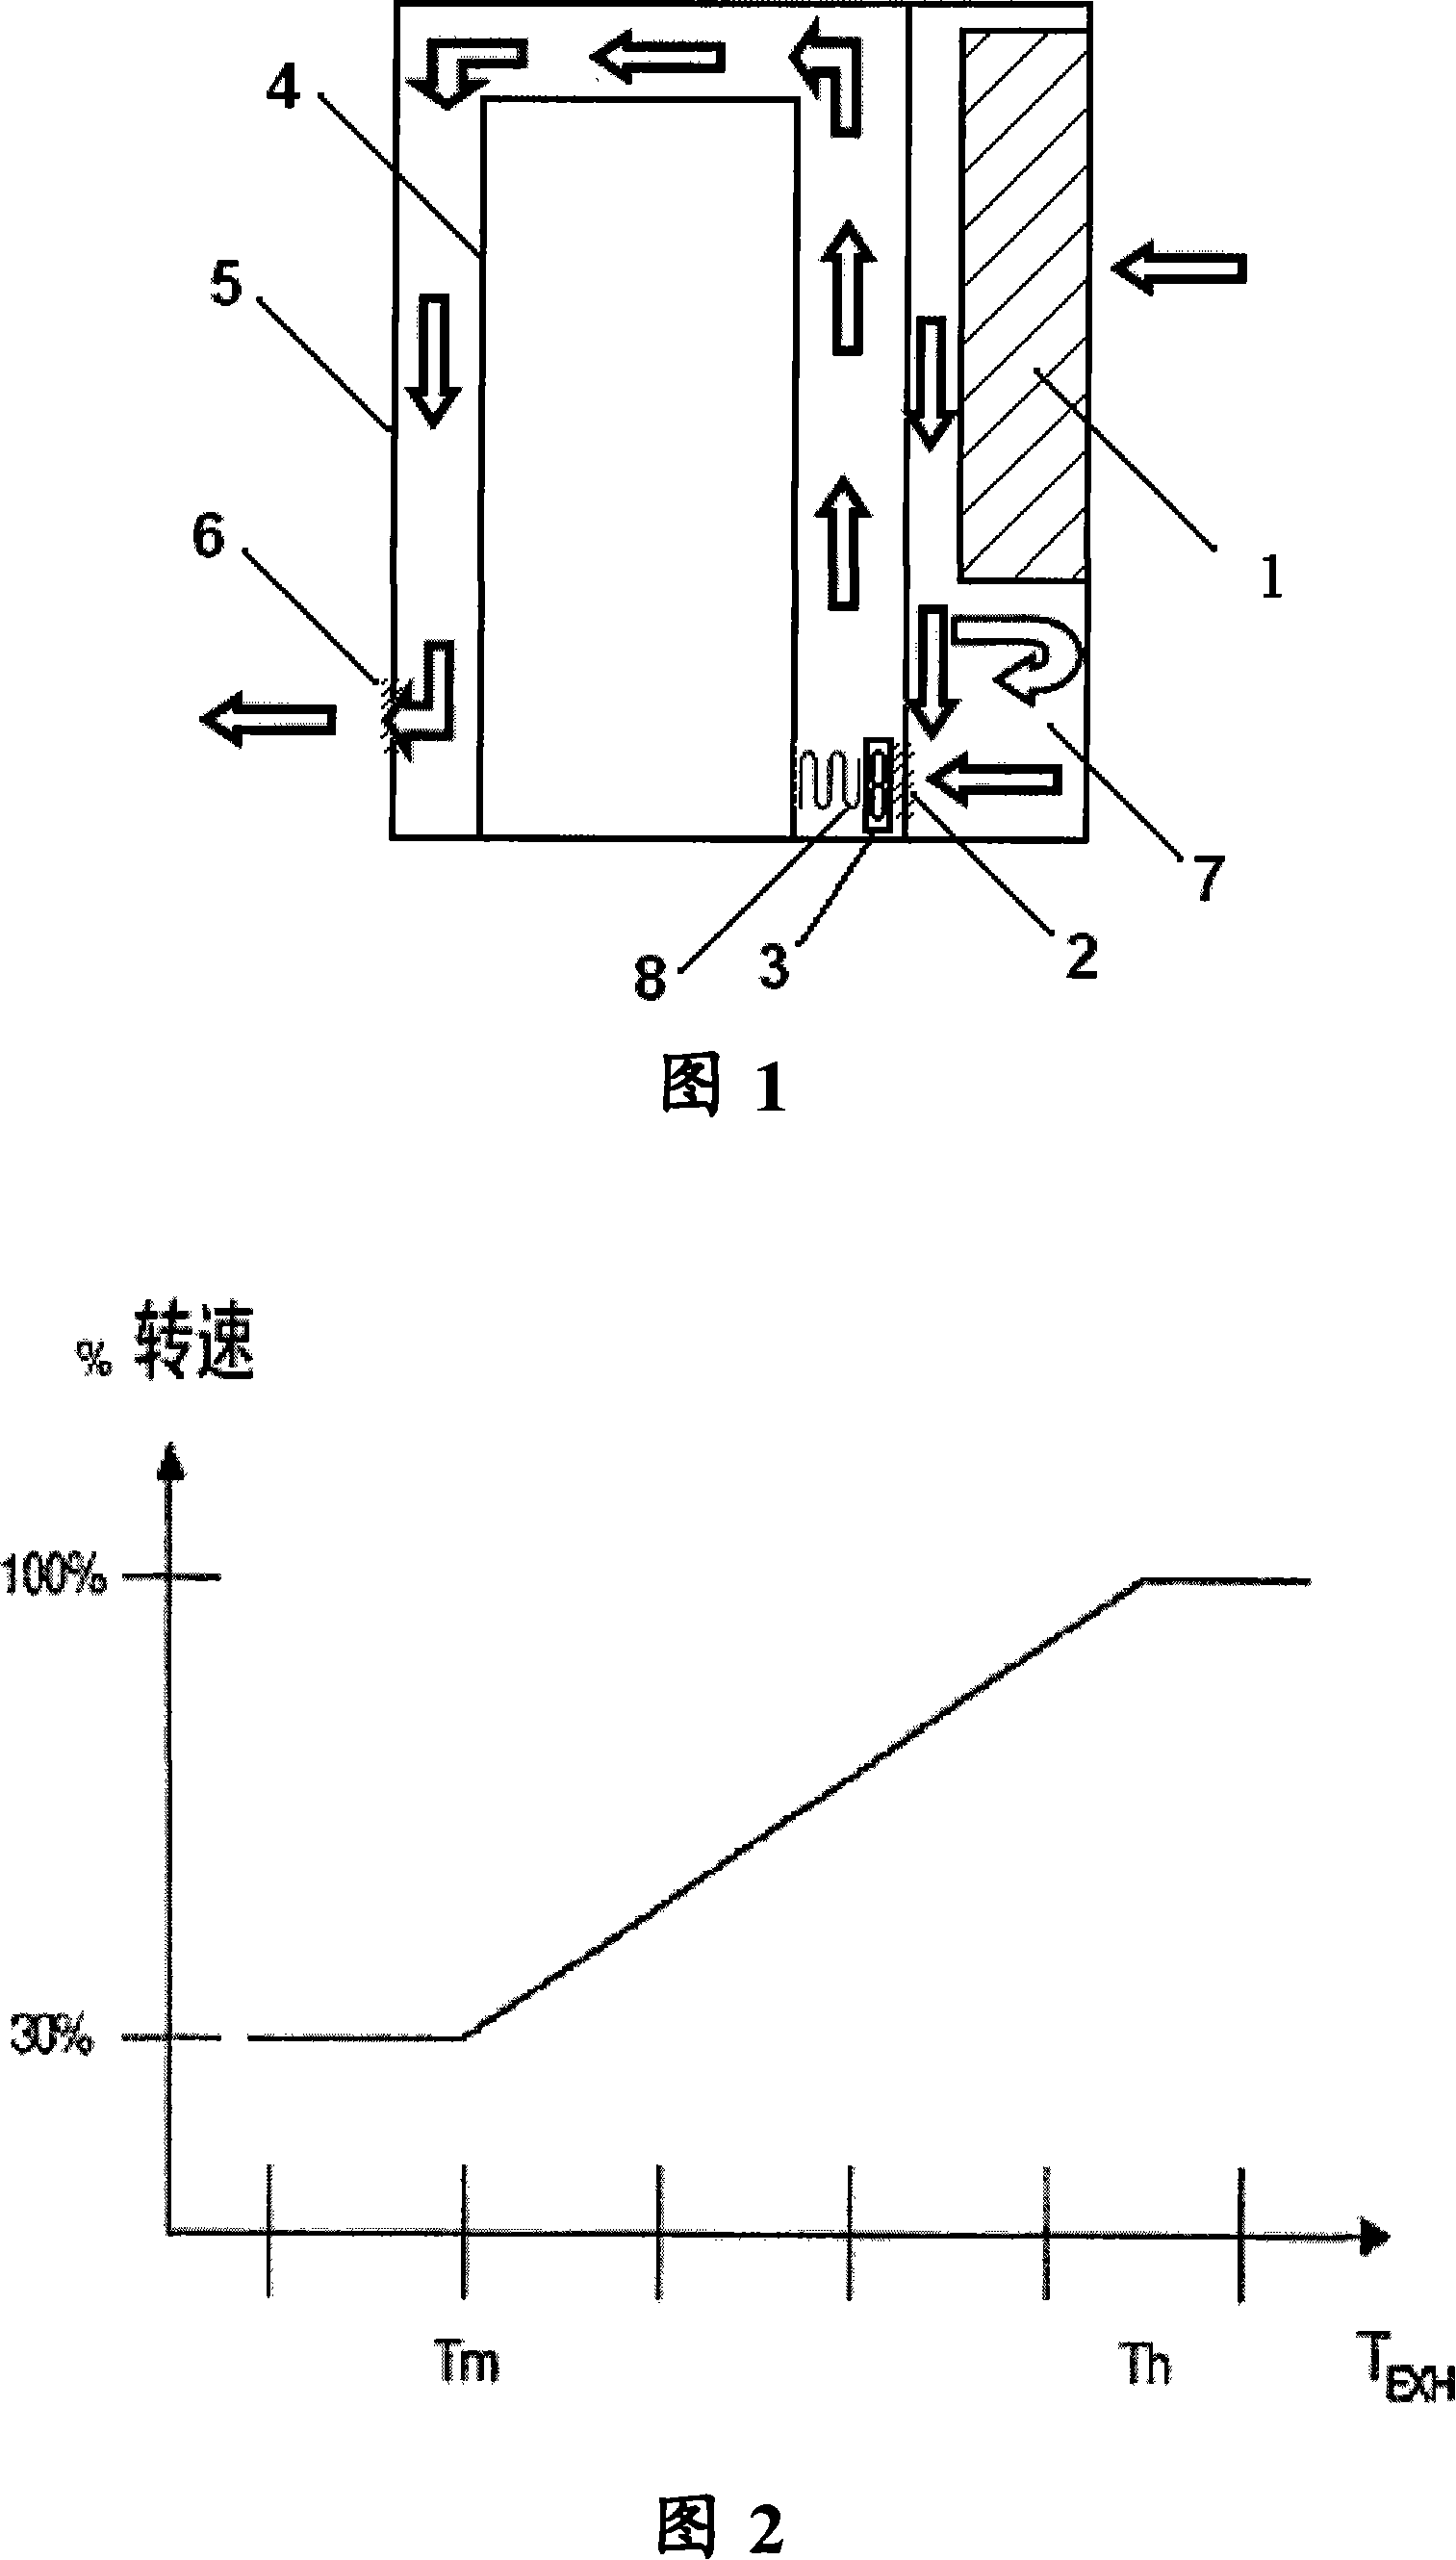 Straight-air radiating device and its control method